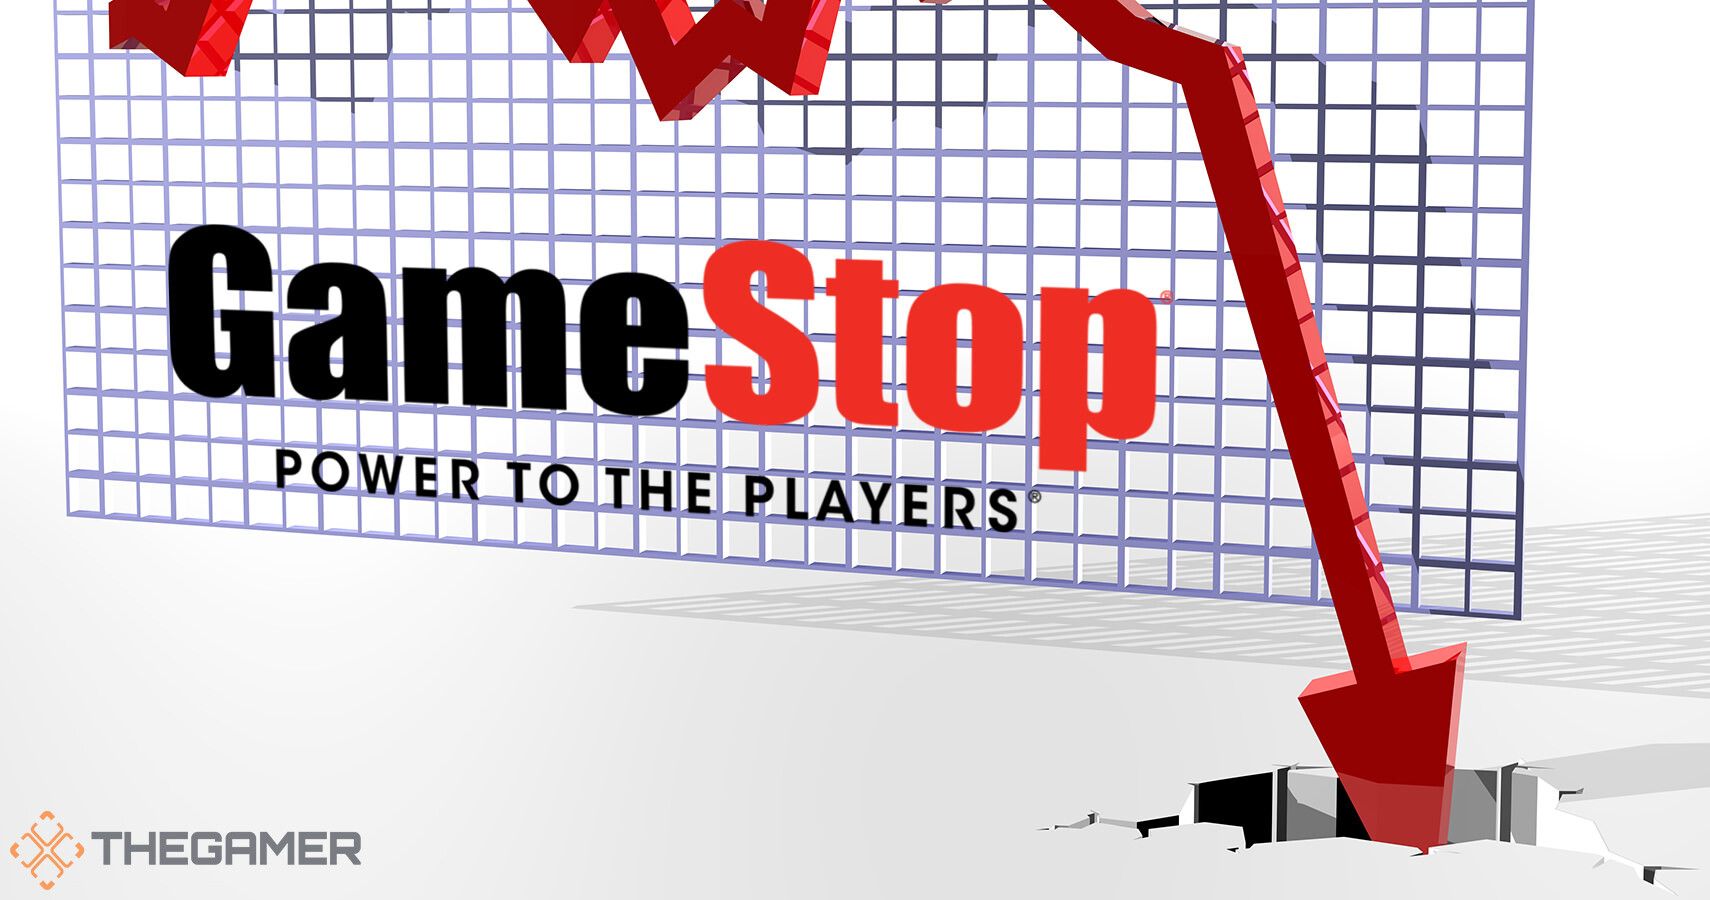 GameStop Stock Has Tanked Following Trading Restrictions